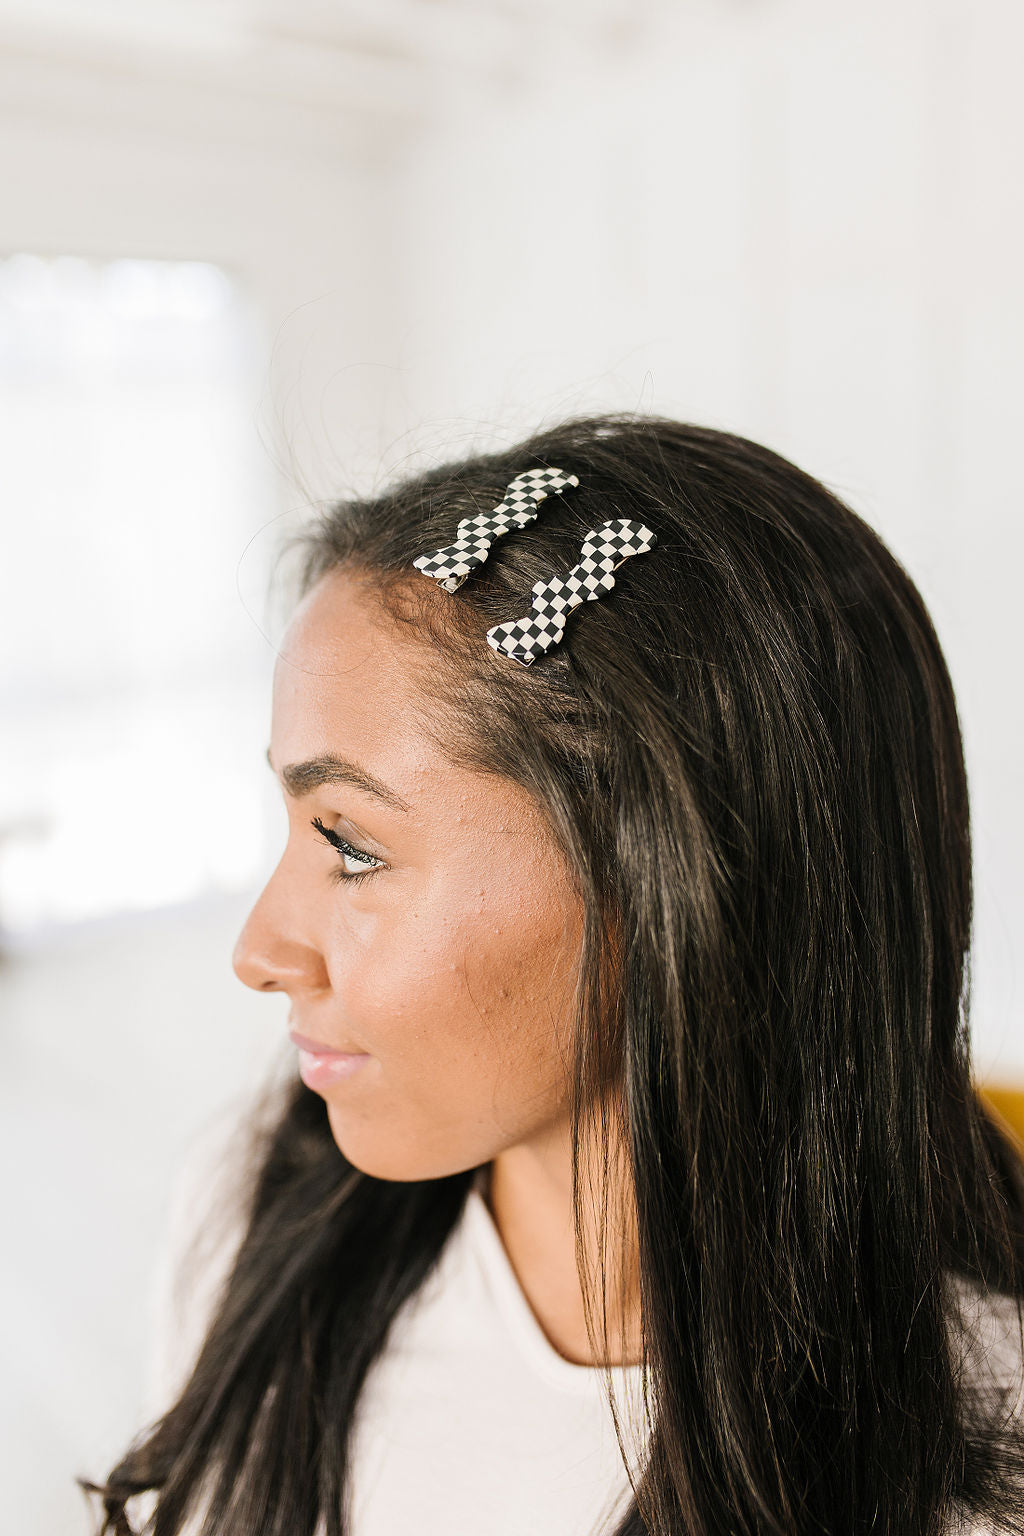 Wavy Clip Set in Checkered Black Womens Southern Soul Collectives 